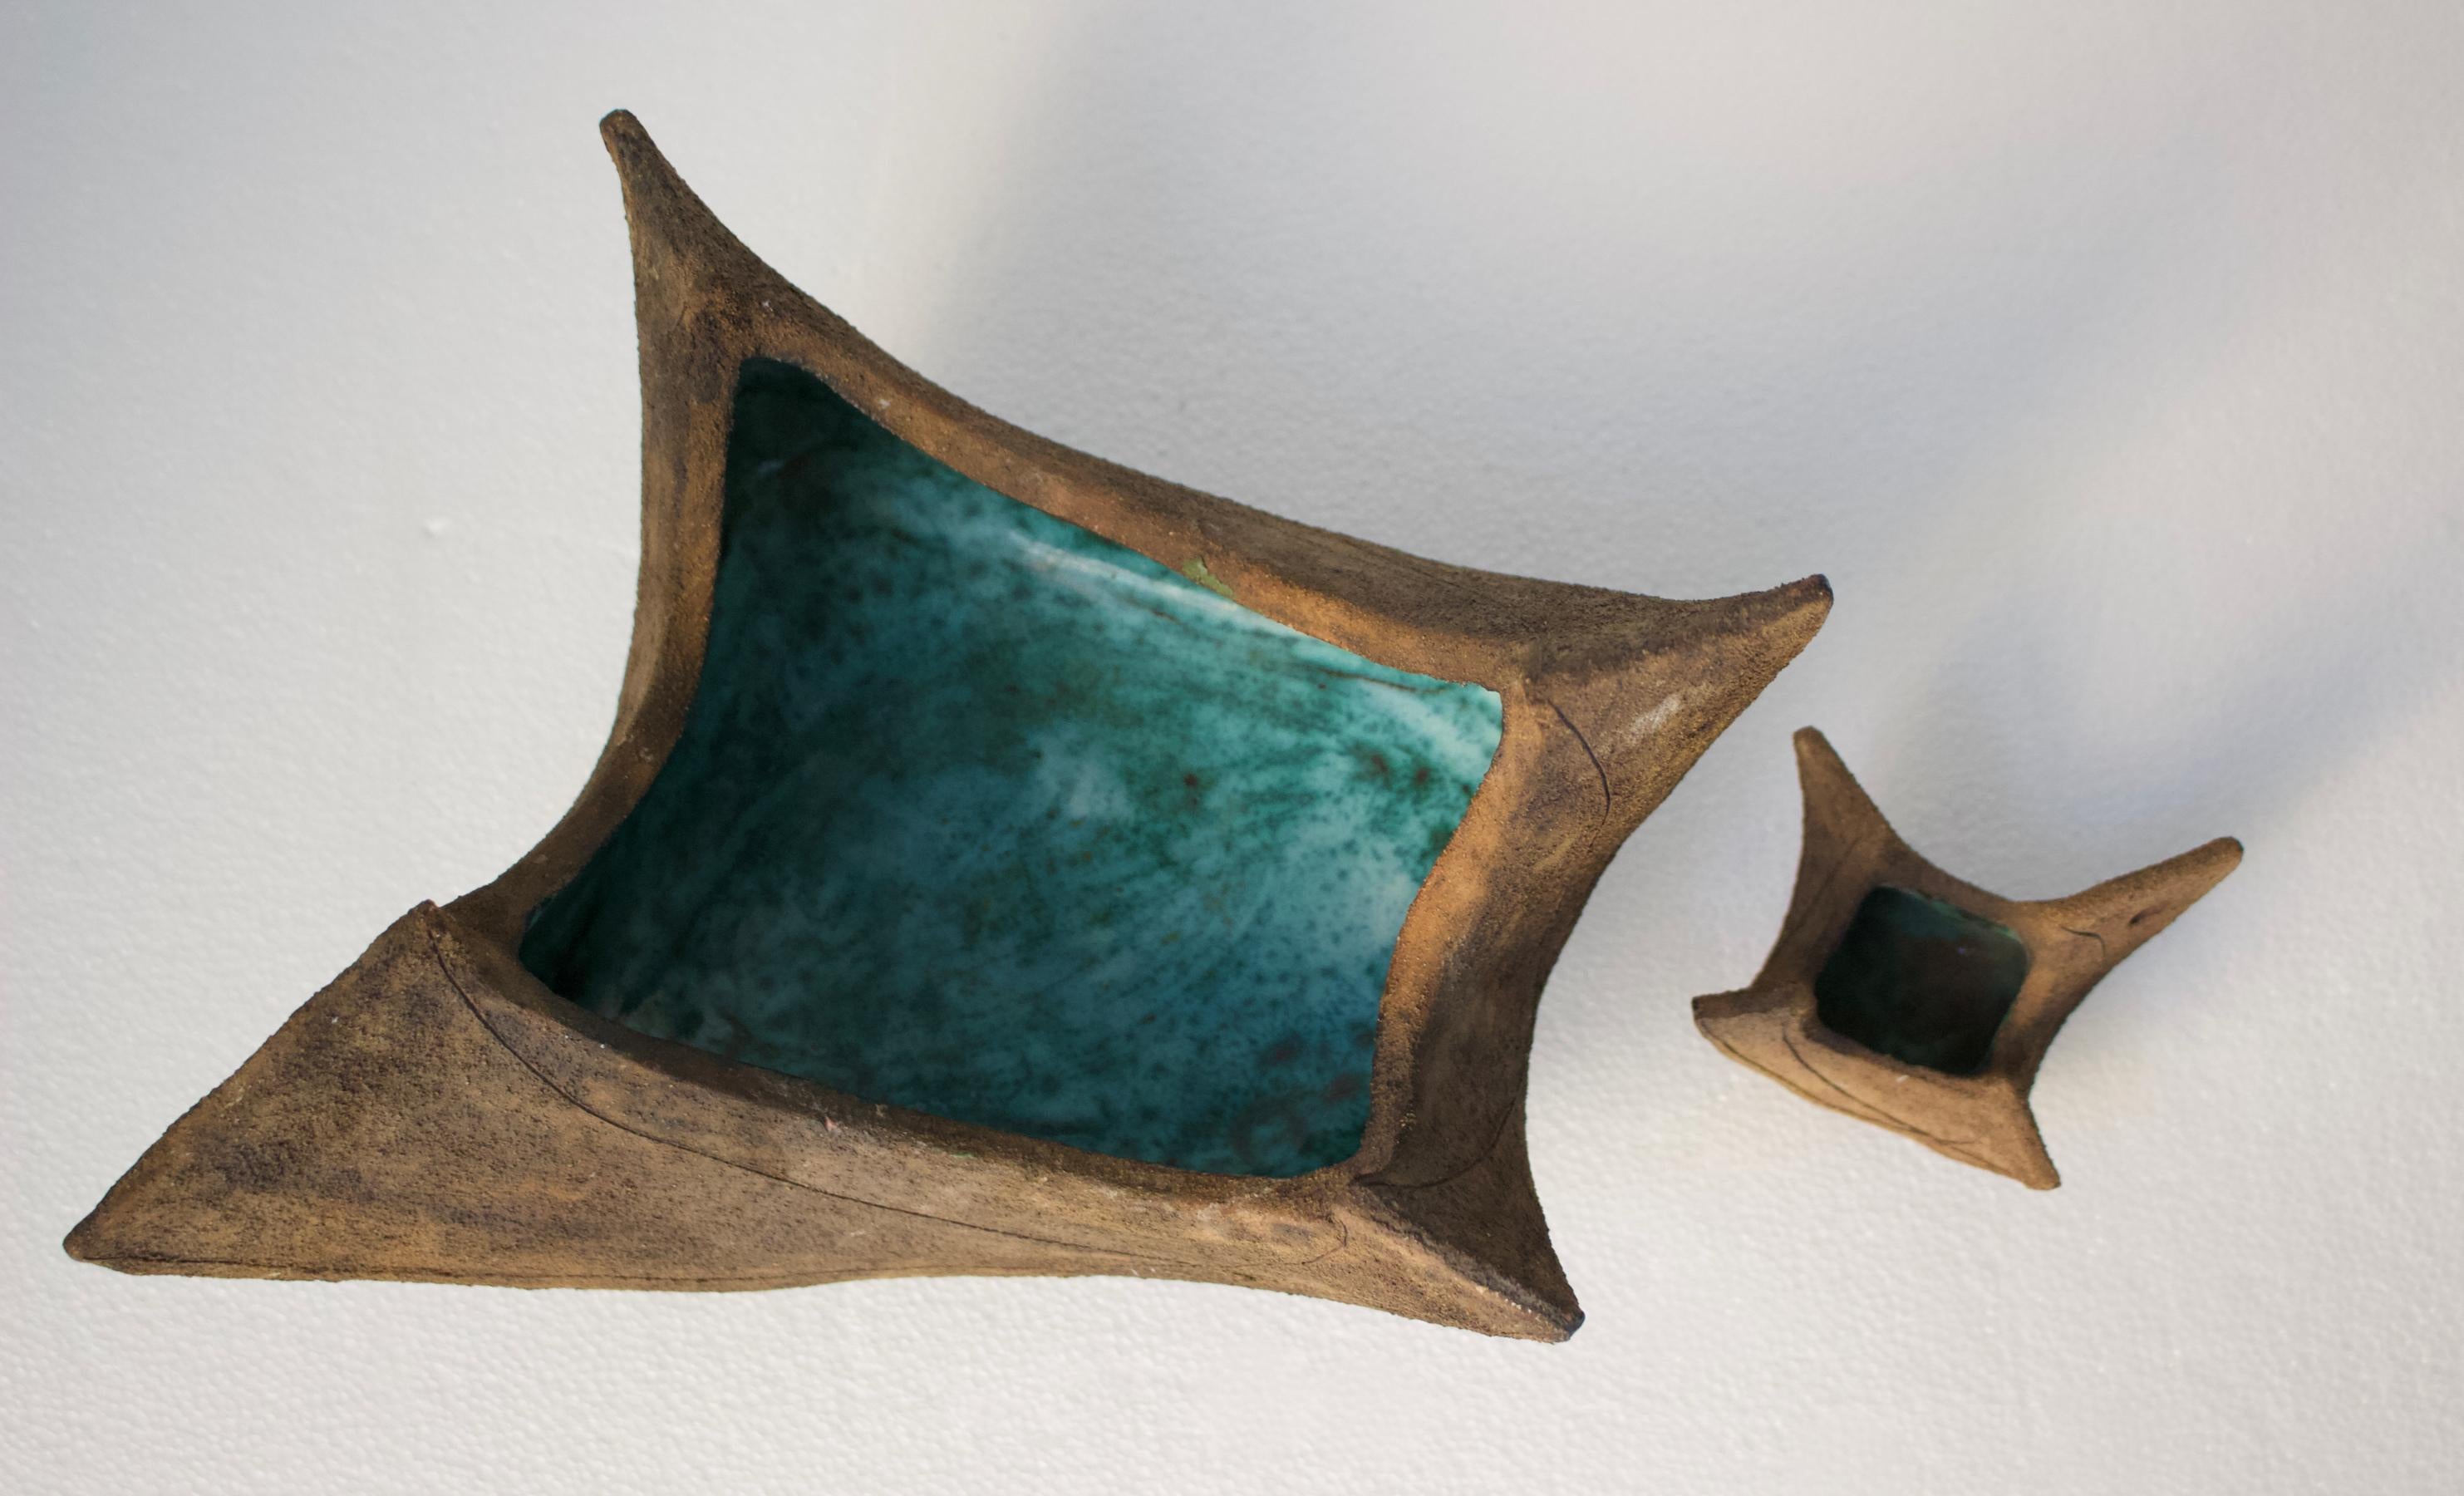 Hand-Crafted Set of Two Studio Ceramic Sculptures or Vessels by Clive Brooker